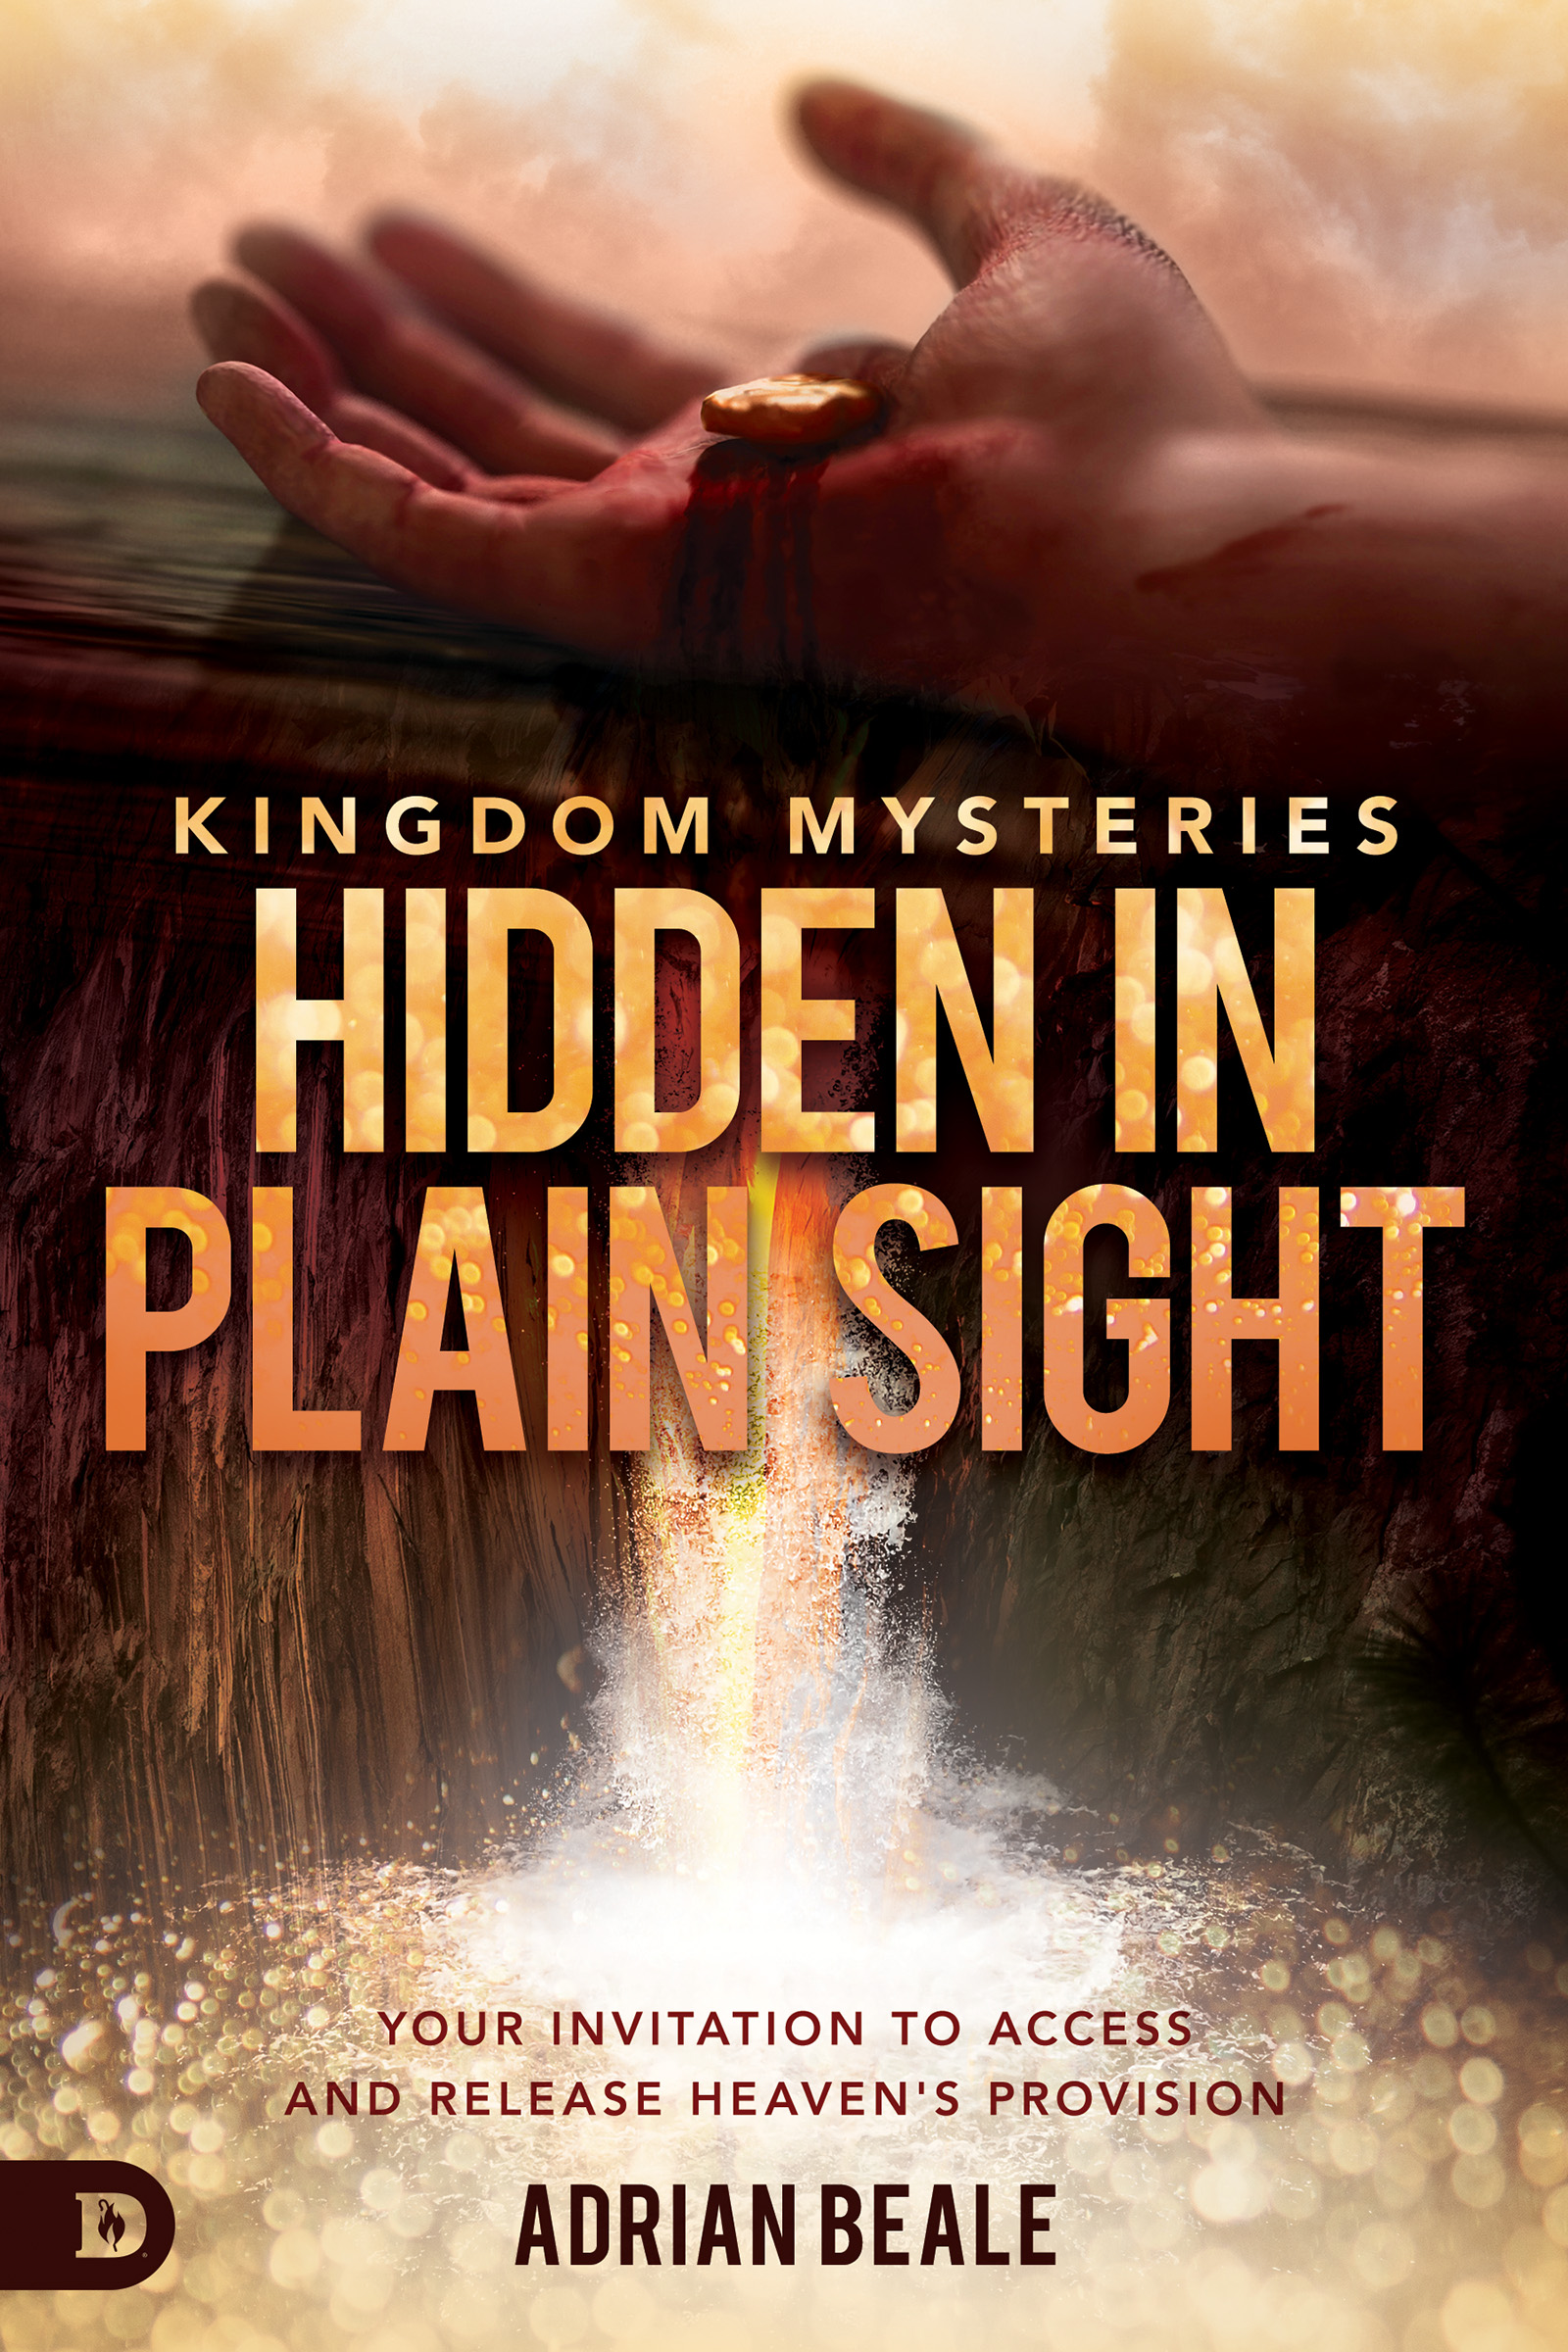 Download Kingdom Mysteries: Hidden in Plain Sight: Your Invitation to Access and Release Heaven's Provision - Adrian Beale file in ePub